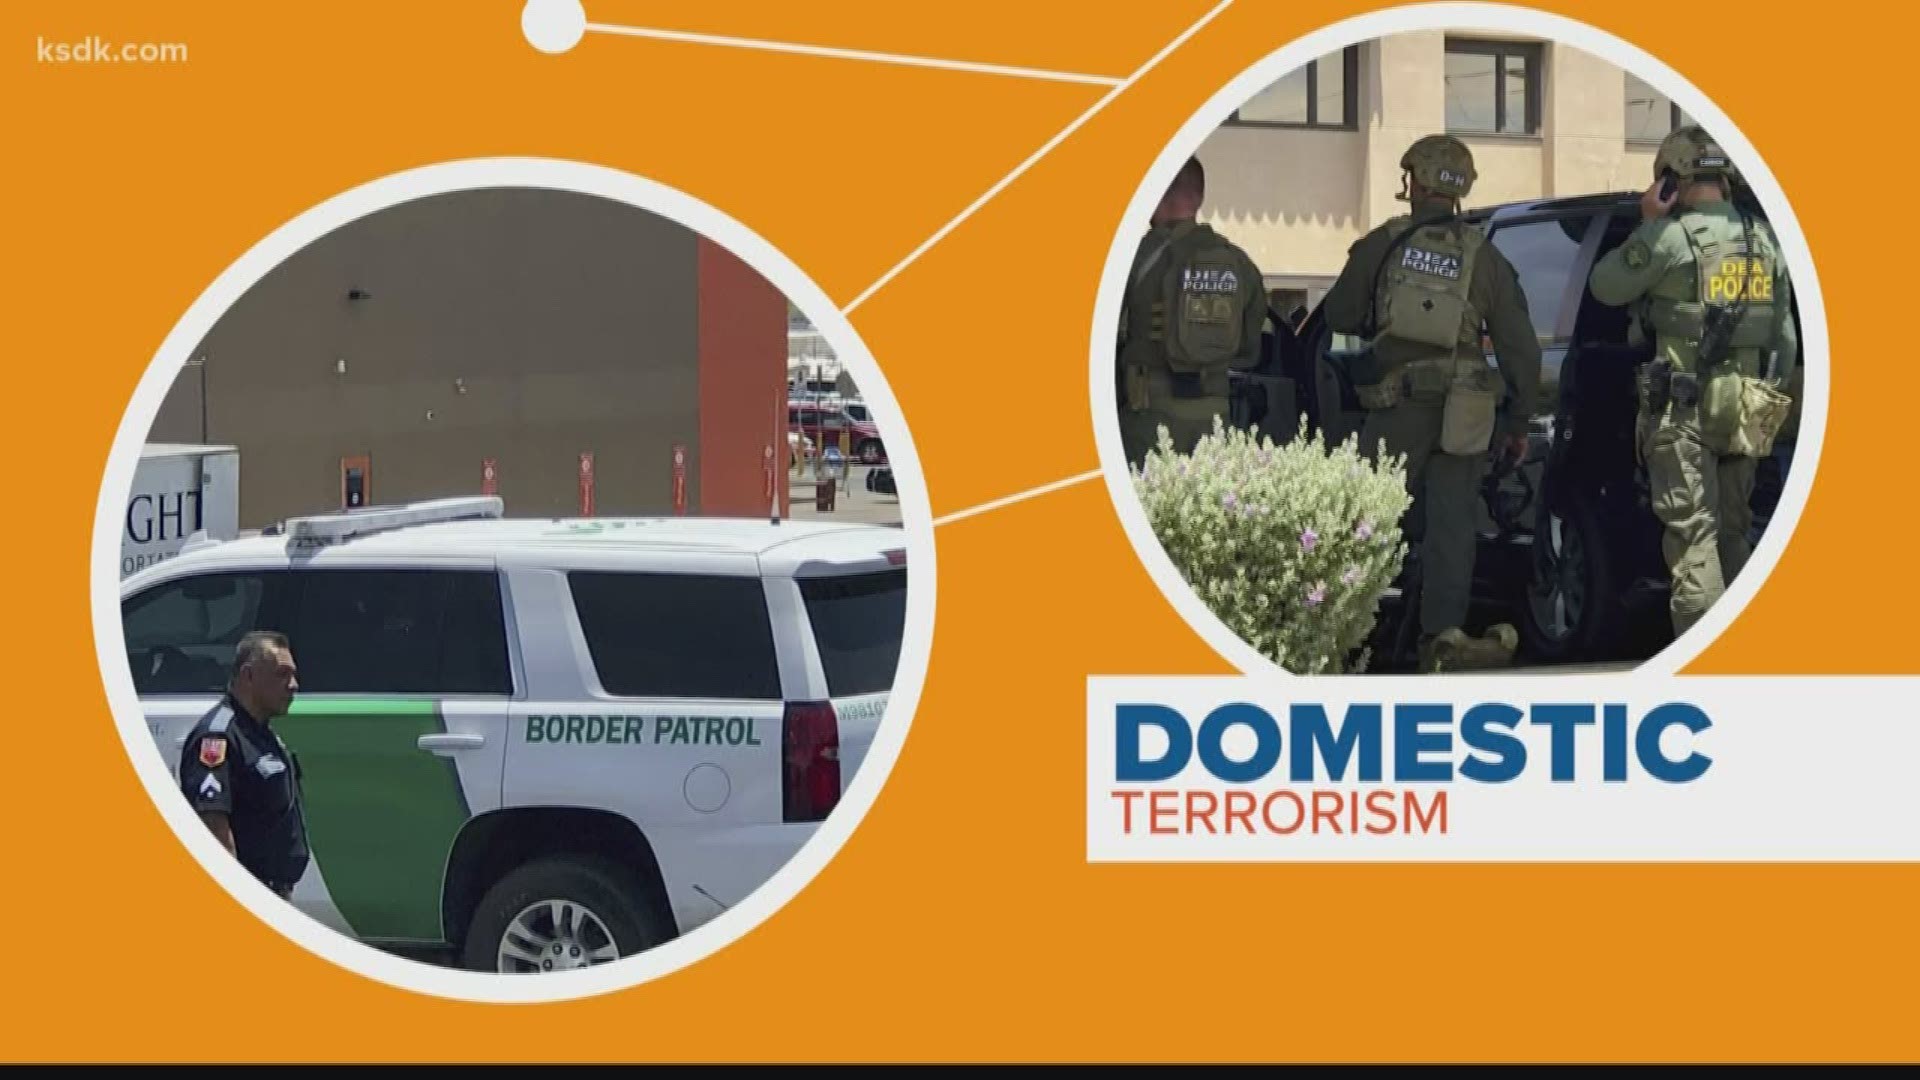 Domestic terrorism. That's how the El Paso shooting is being defined. But that's all it is. A term. The alleged shooter can't actually be charged with domestic terrorism. Why? Let's connect the dots.